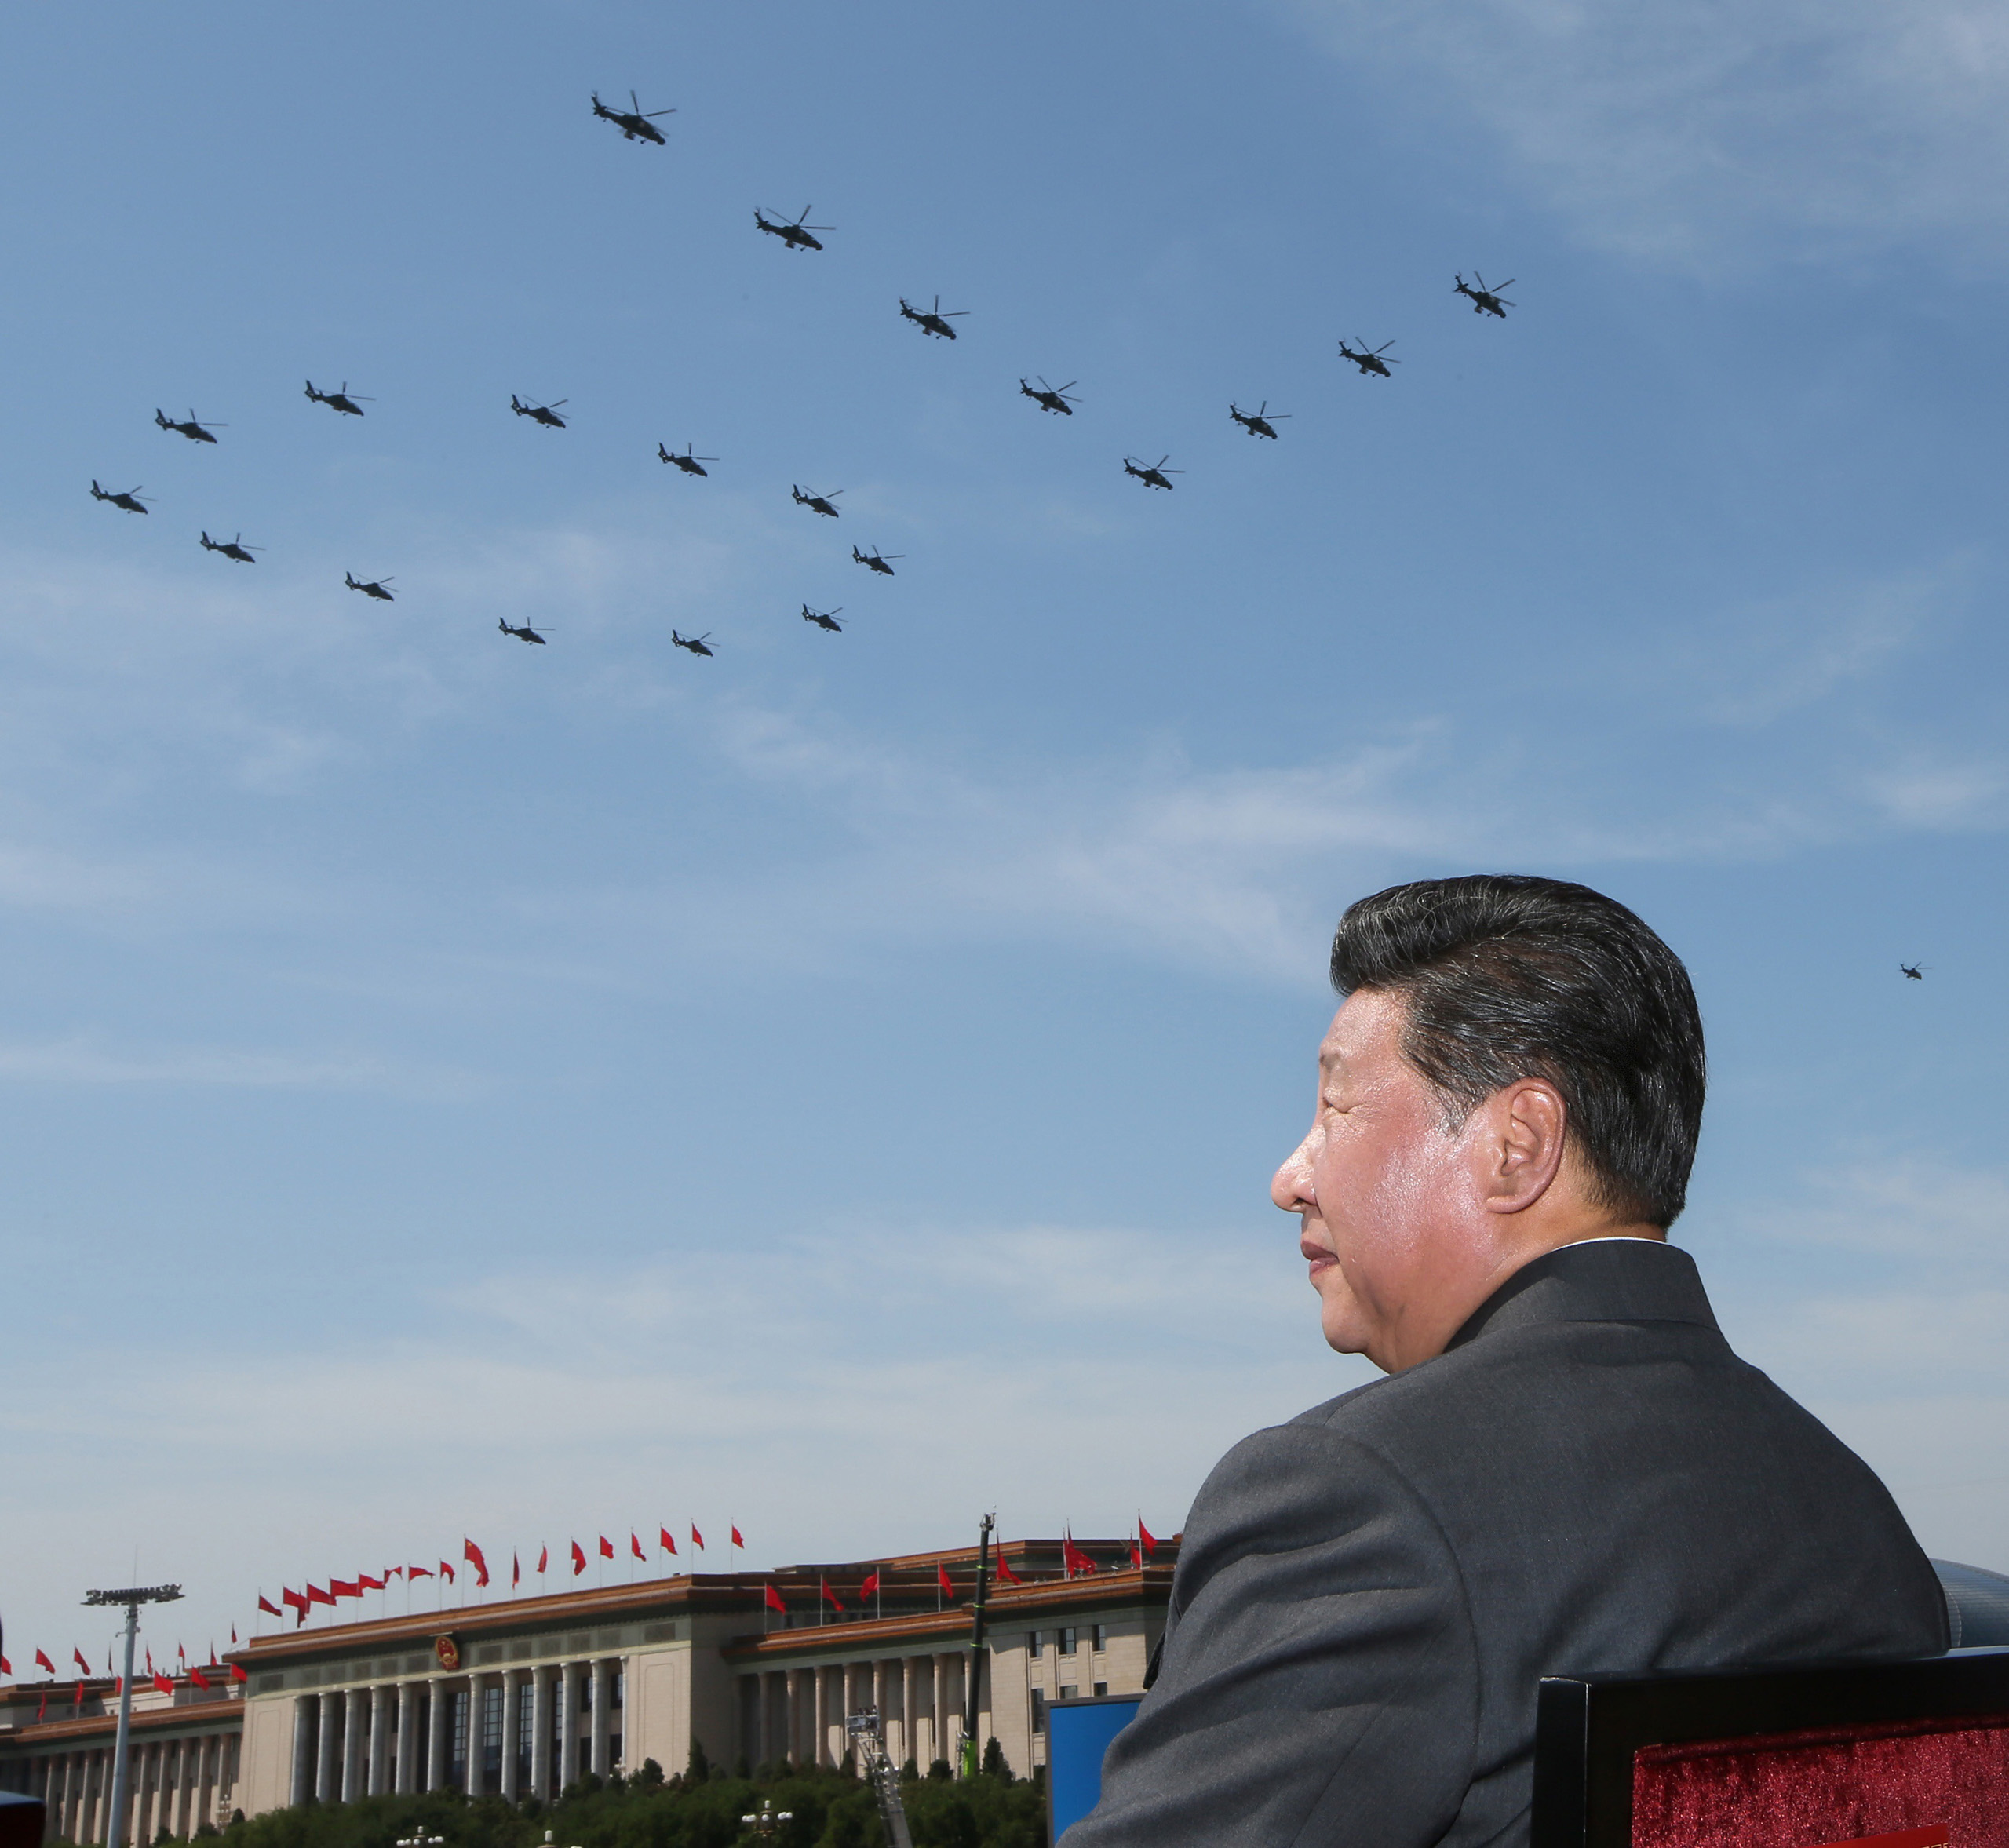 Chinese leader Xi Jinping watches a helicopter fly past, part of a big military parade on Sept. 3 at Beijing’s historic Tiananmen Square. (Lan Hongguang—Xinhua/Getty Images)